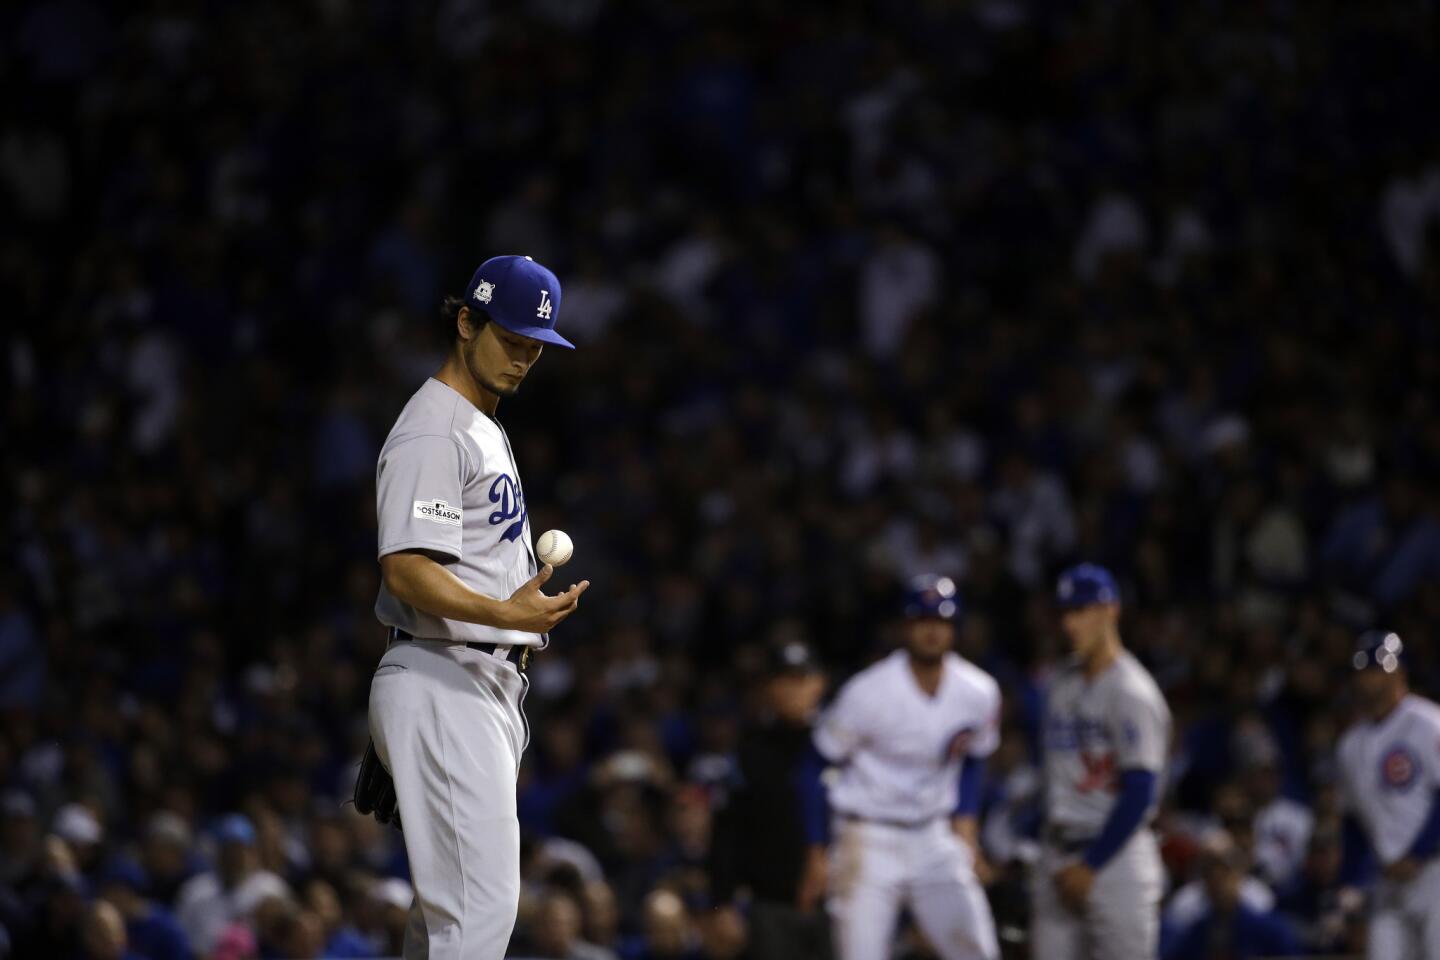 Los Angeles Dodgers starting pitcher Yu Darvish pauses between pitches during the first inning of Game 3 of baseball's National League Championship Series against the Chicago Cubs, Tuesday, Oct. 17, 2017, in Chicago. (AP Photo/Nam Y. Huh)